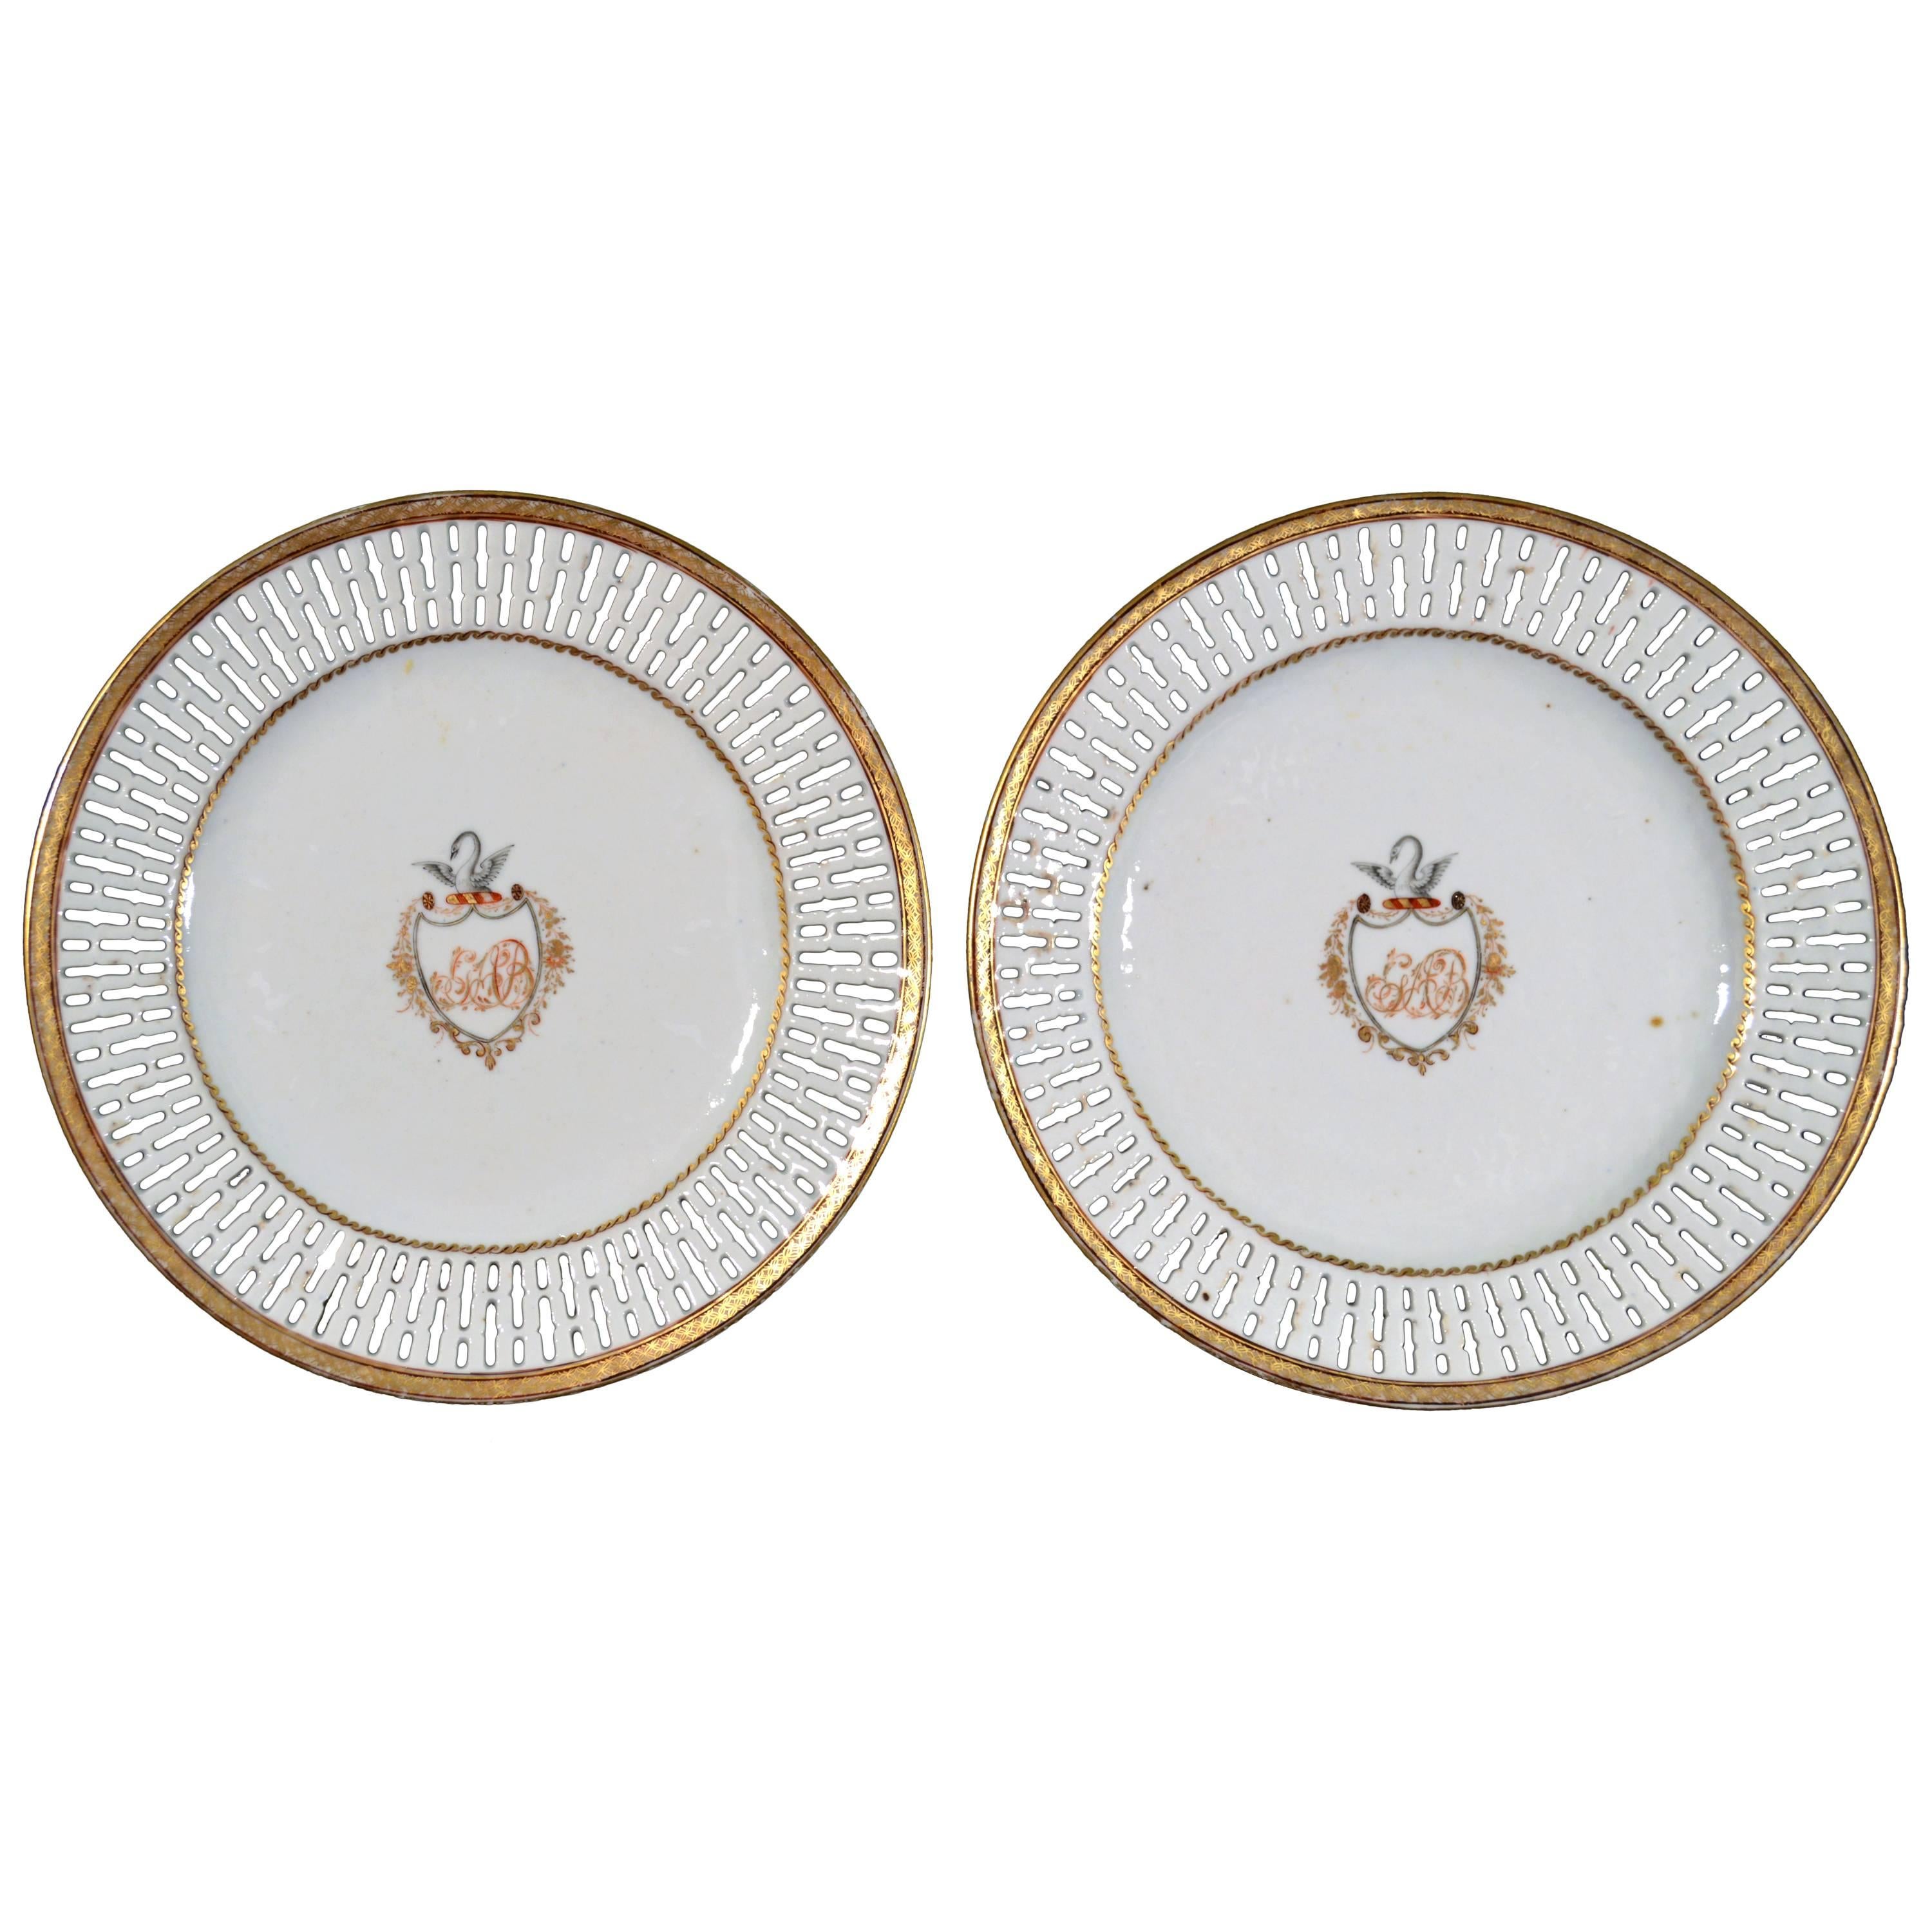 Pair of Chinese Export Crested Openwork Plates Made for Captain Blatchford